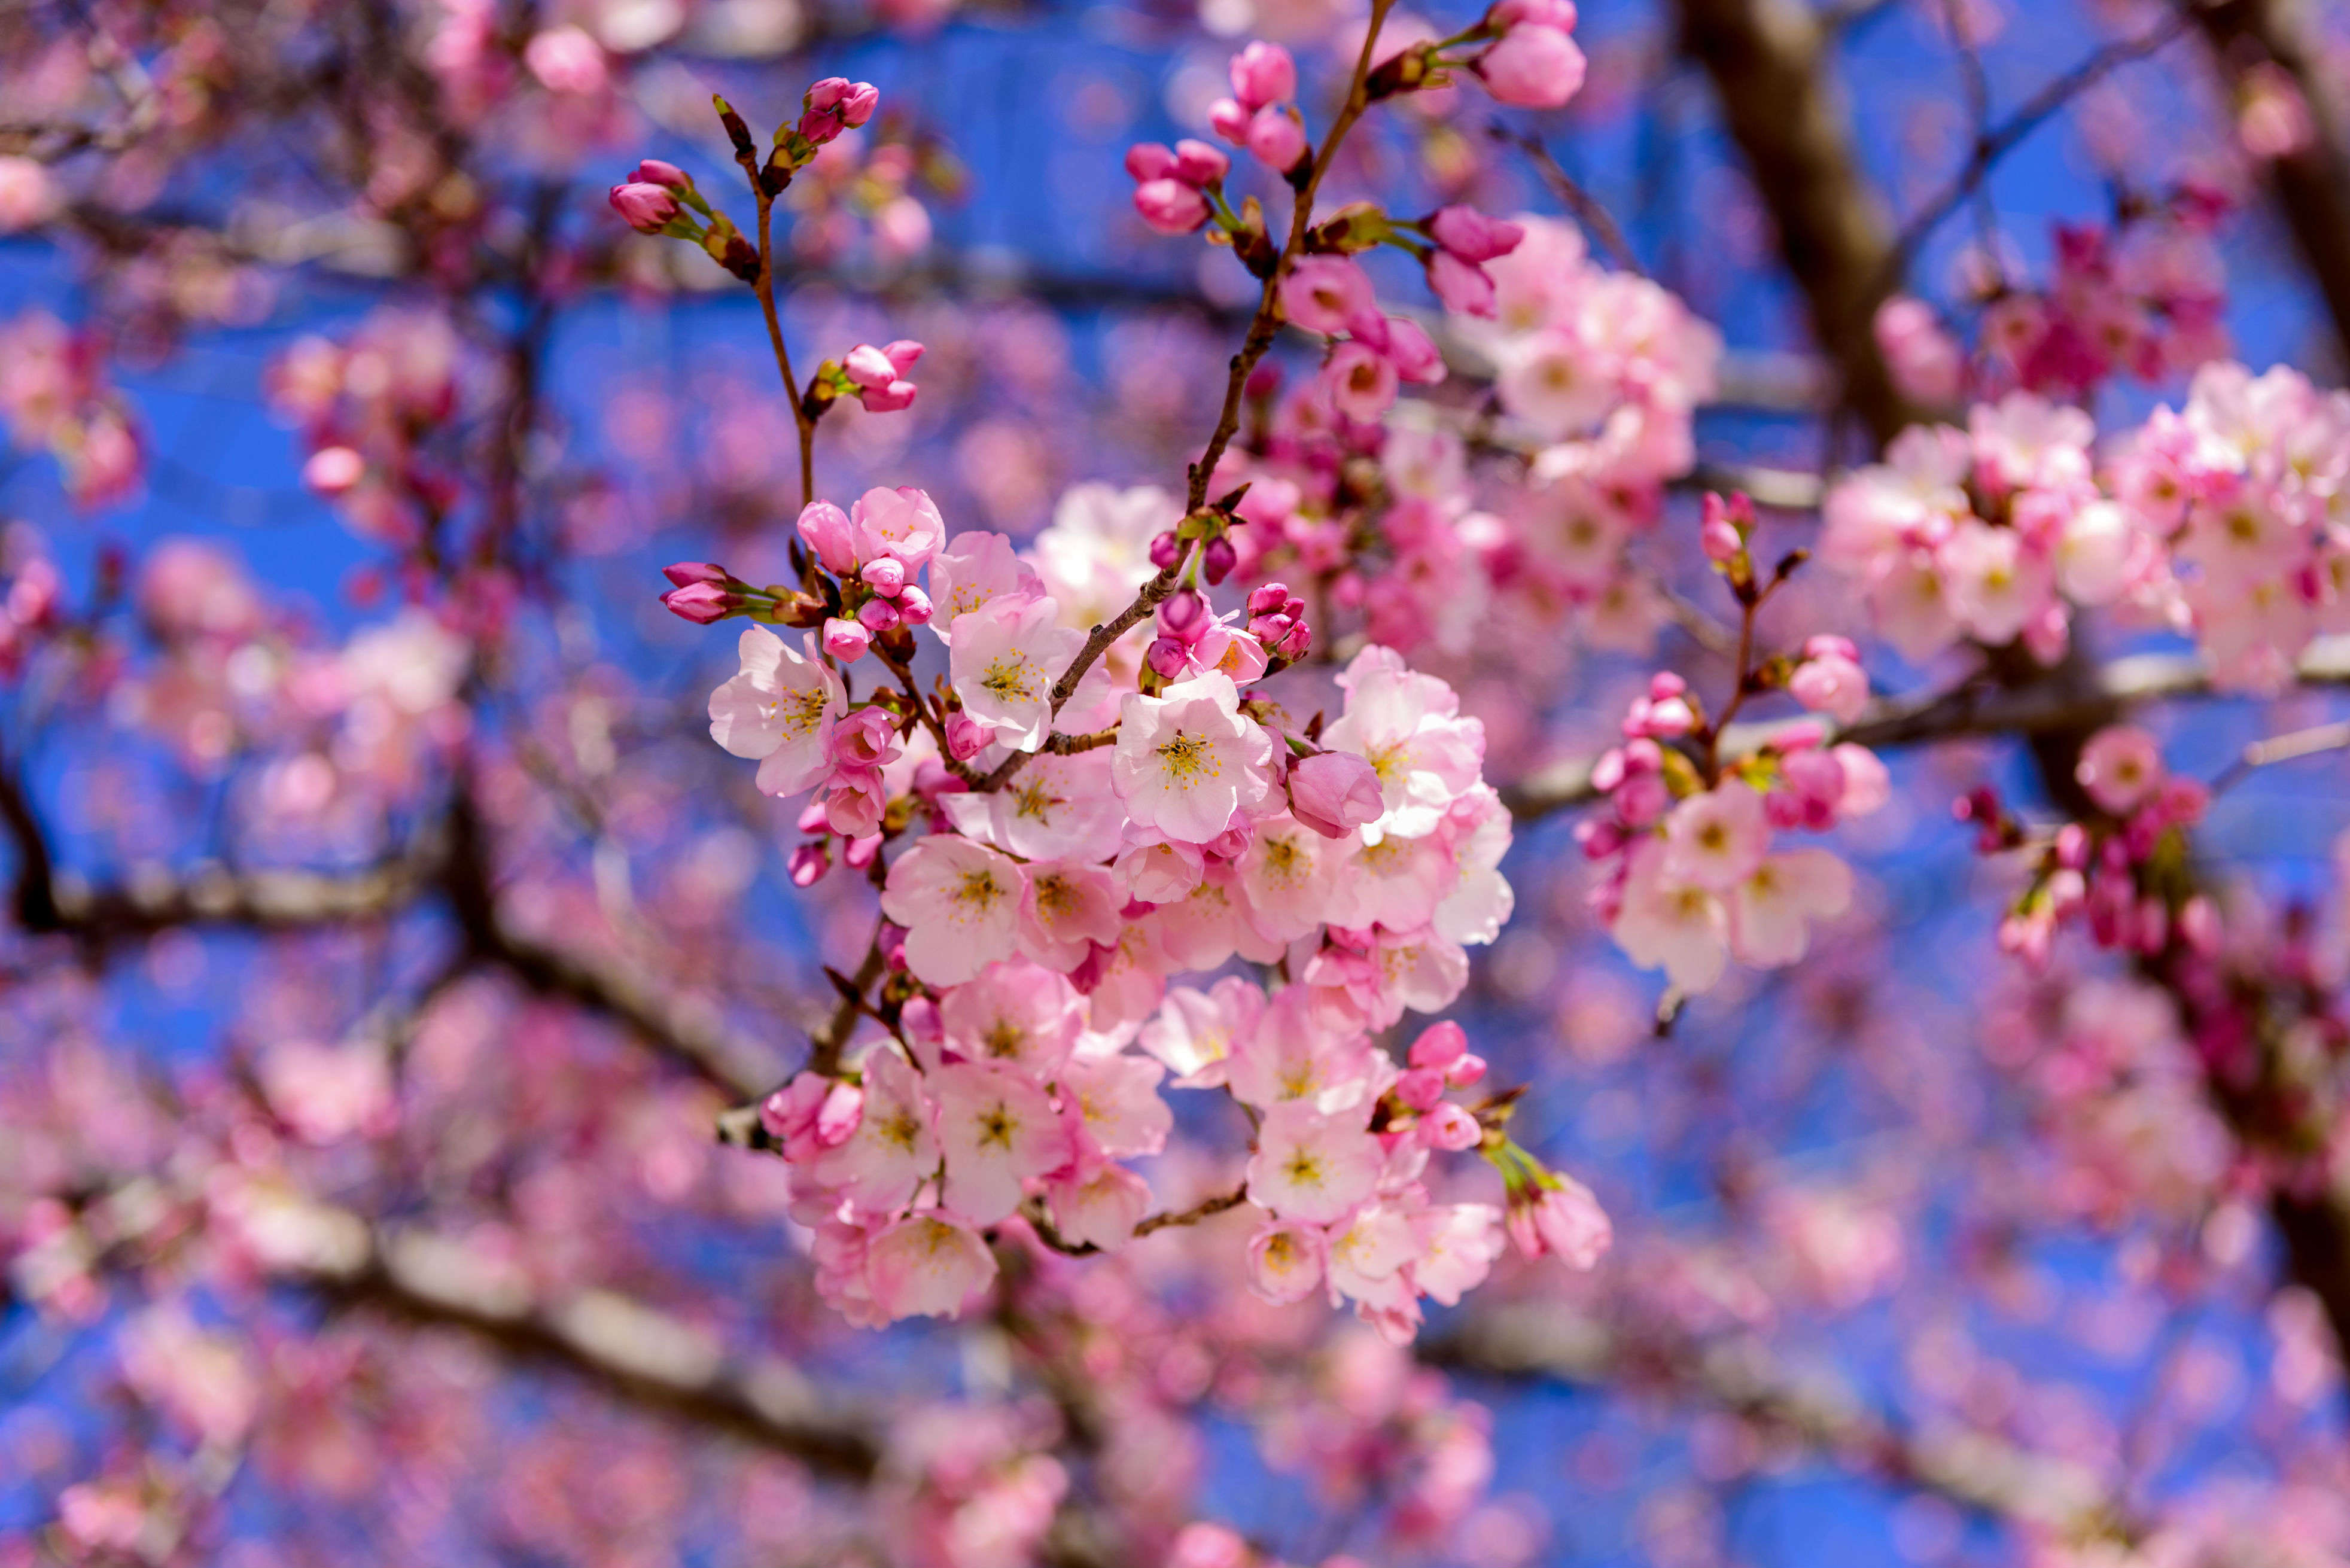 Celebrate Cherry Blossom Festival in Shillong this year Times of